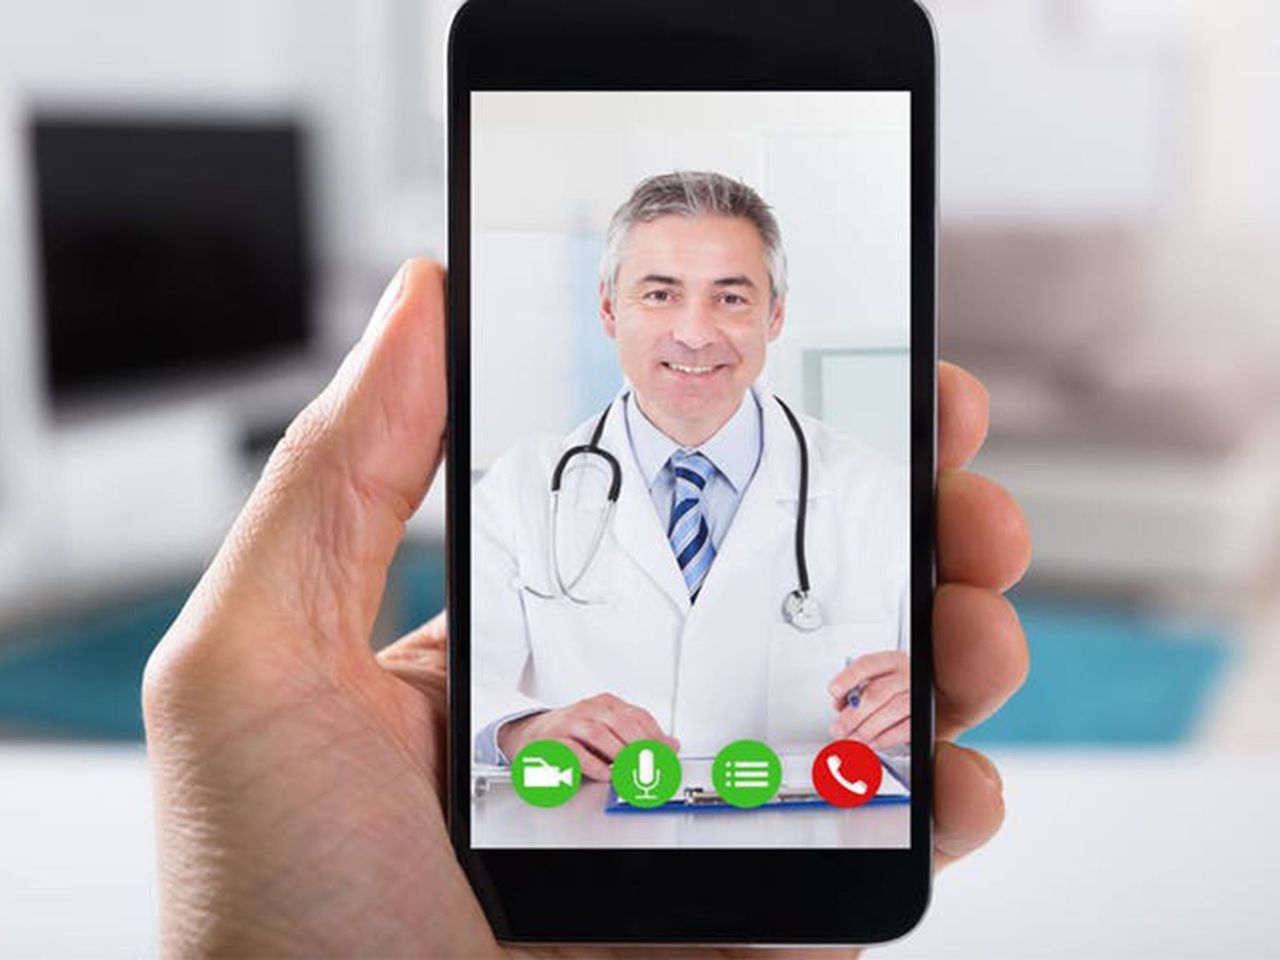 Swedish health tech startup Kry launches free video consultation service in Europe. Image via The Independent.